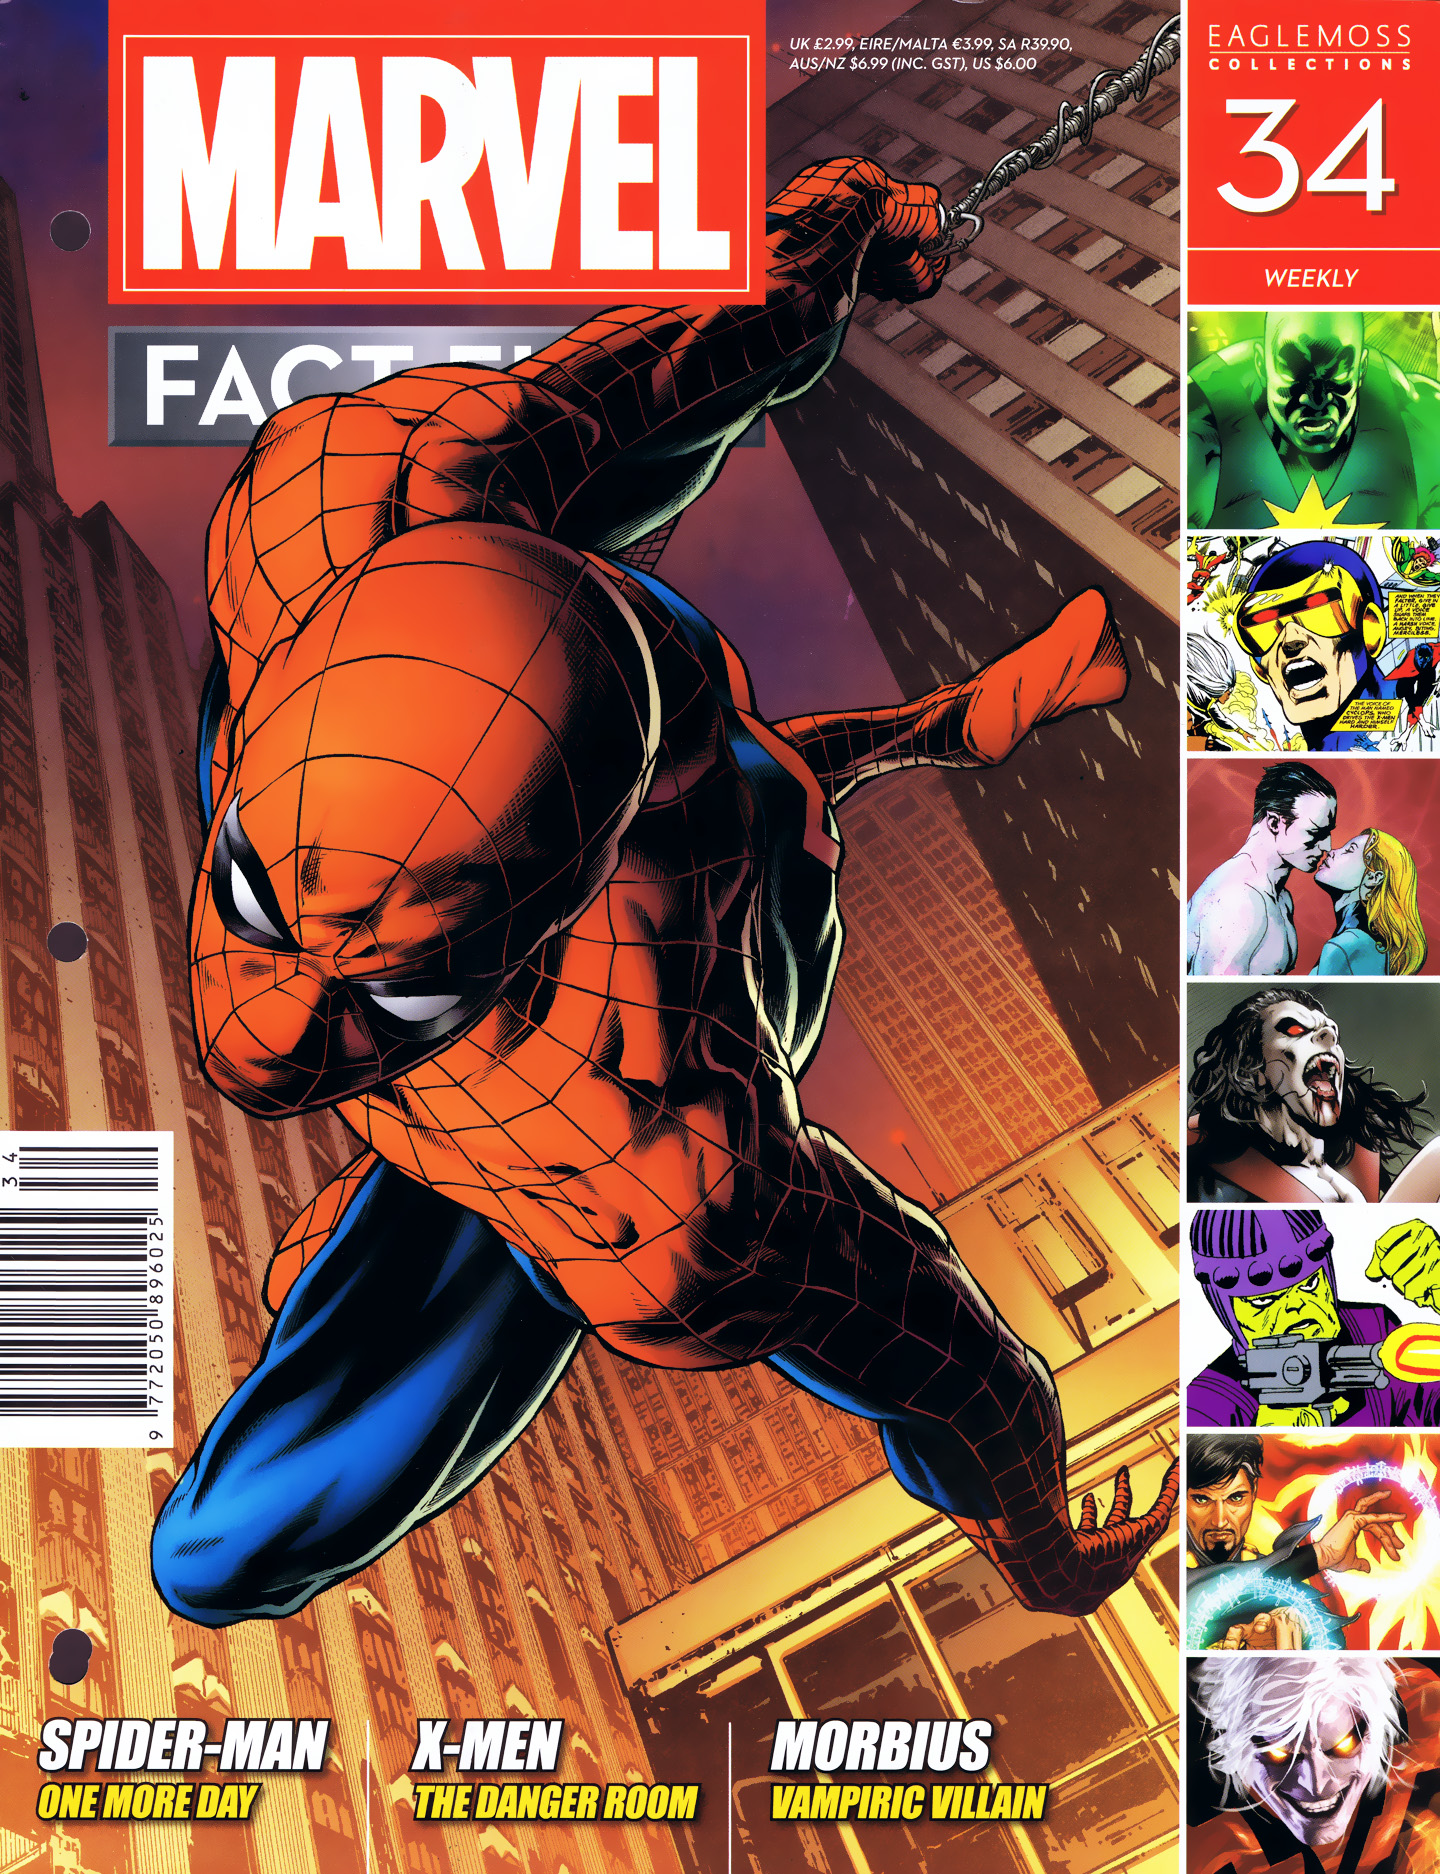 Read online Marvel Fact Files comic -  Issue #34 - 1